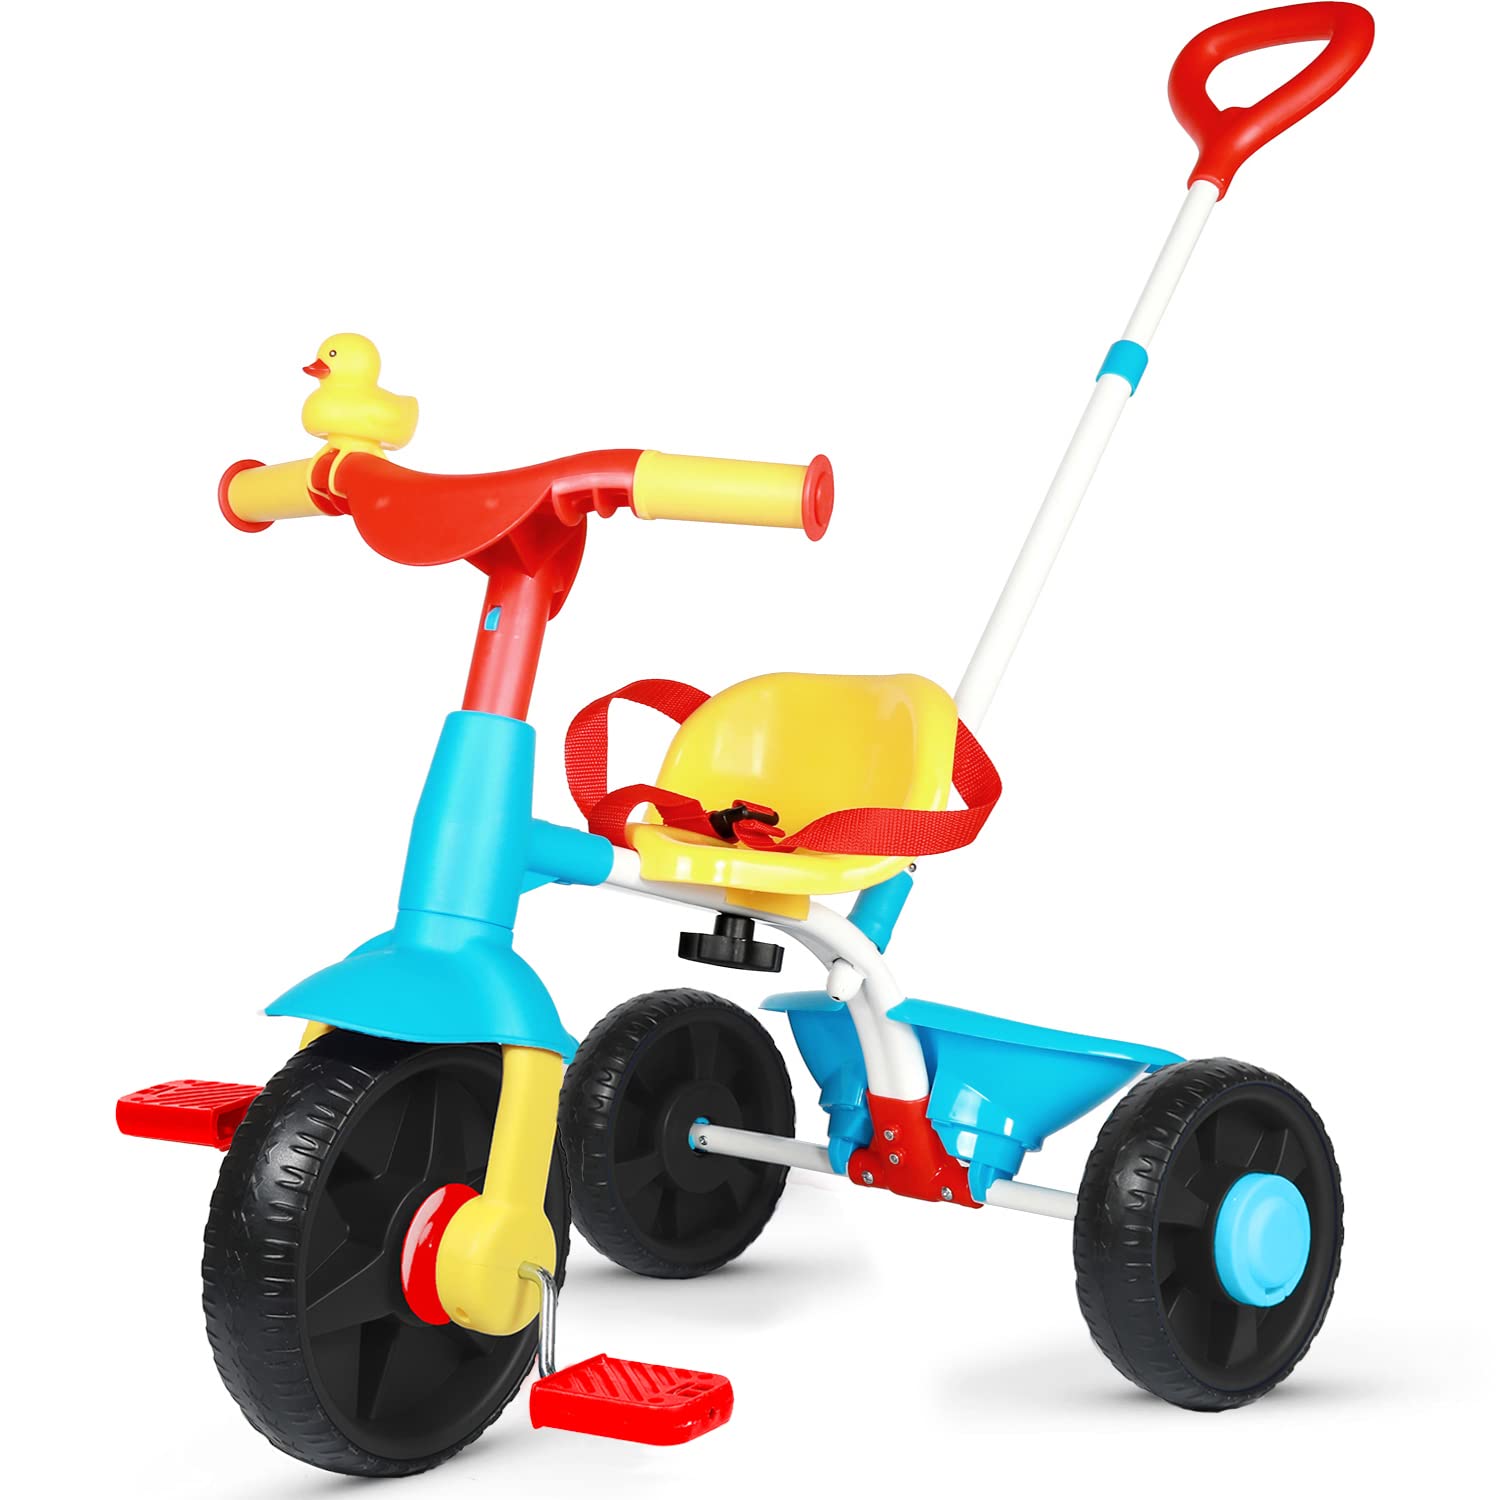 KRIDDO 2 in 1 Kids Tricycles Age 18 Month to 3 Years, Gift Toddler Tricycles for 2-3 Year Olds, Trikes for Toddlers with Push Handle and Duck Bell (Classic, EVA Wheel)